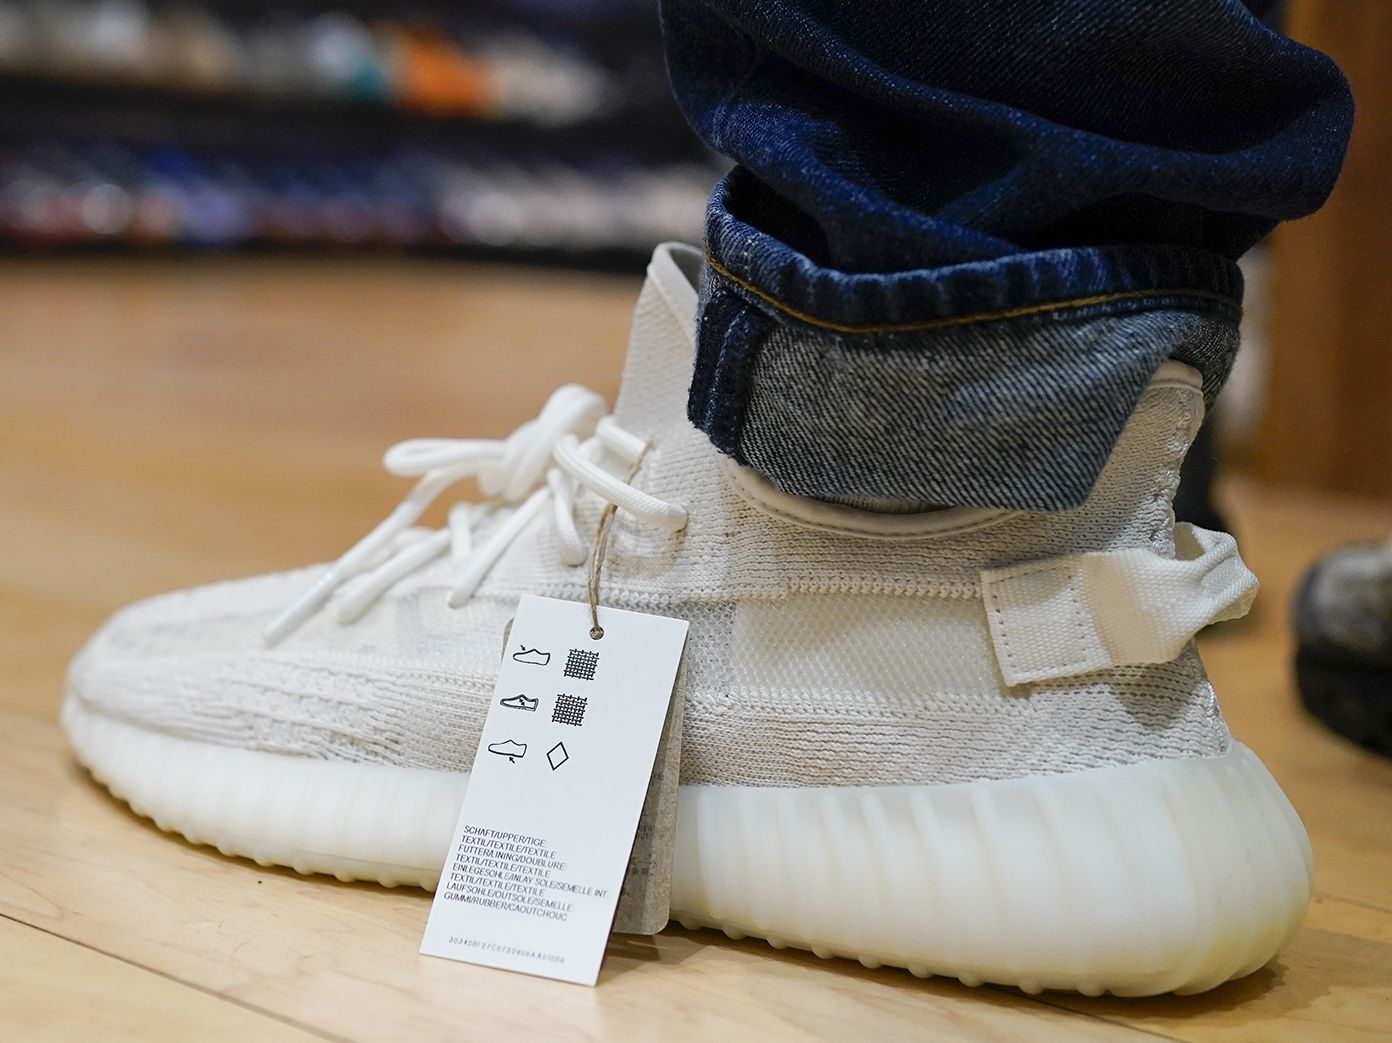 Adidas will continue sell Kanye West's shoe designs the Yeezy | CNN Business